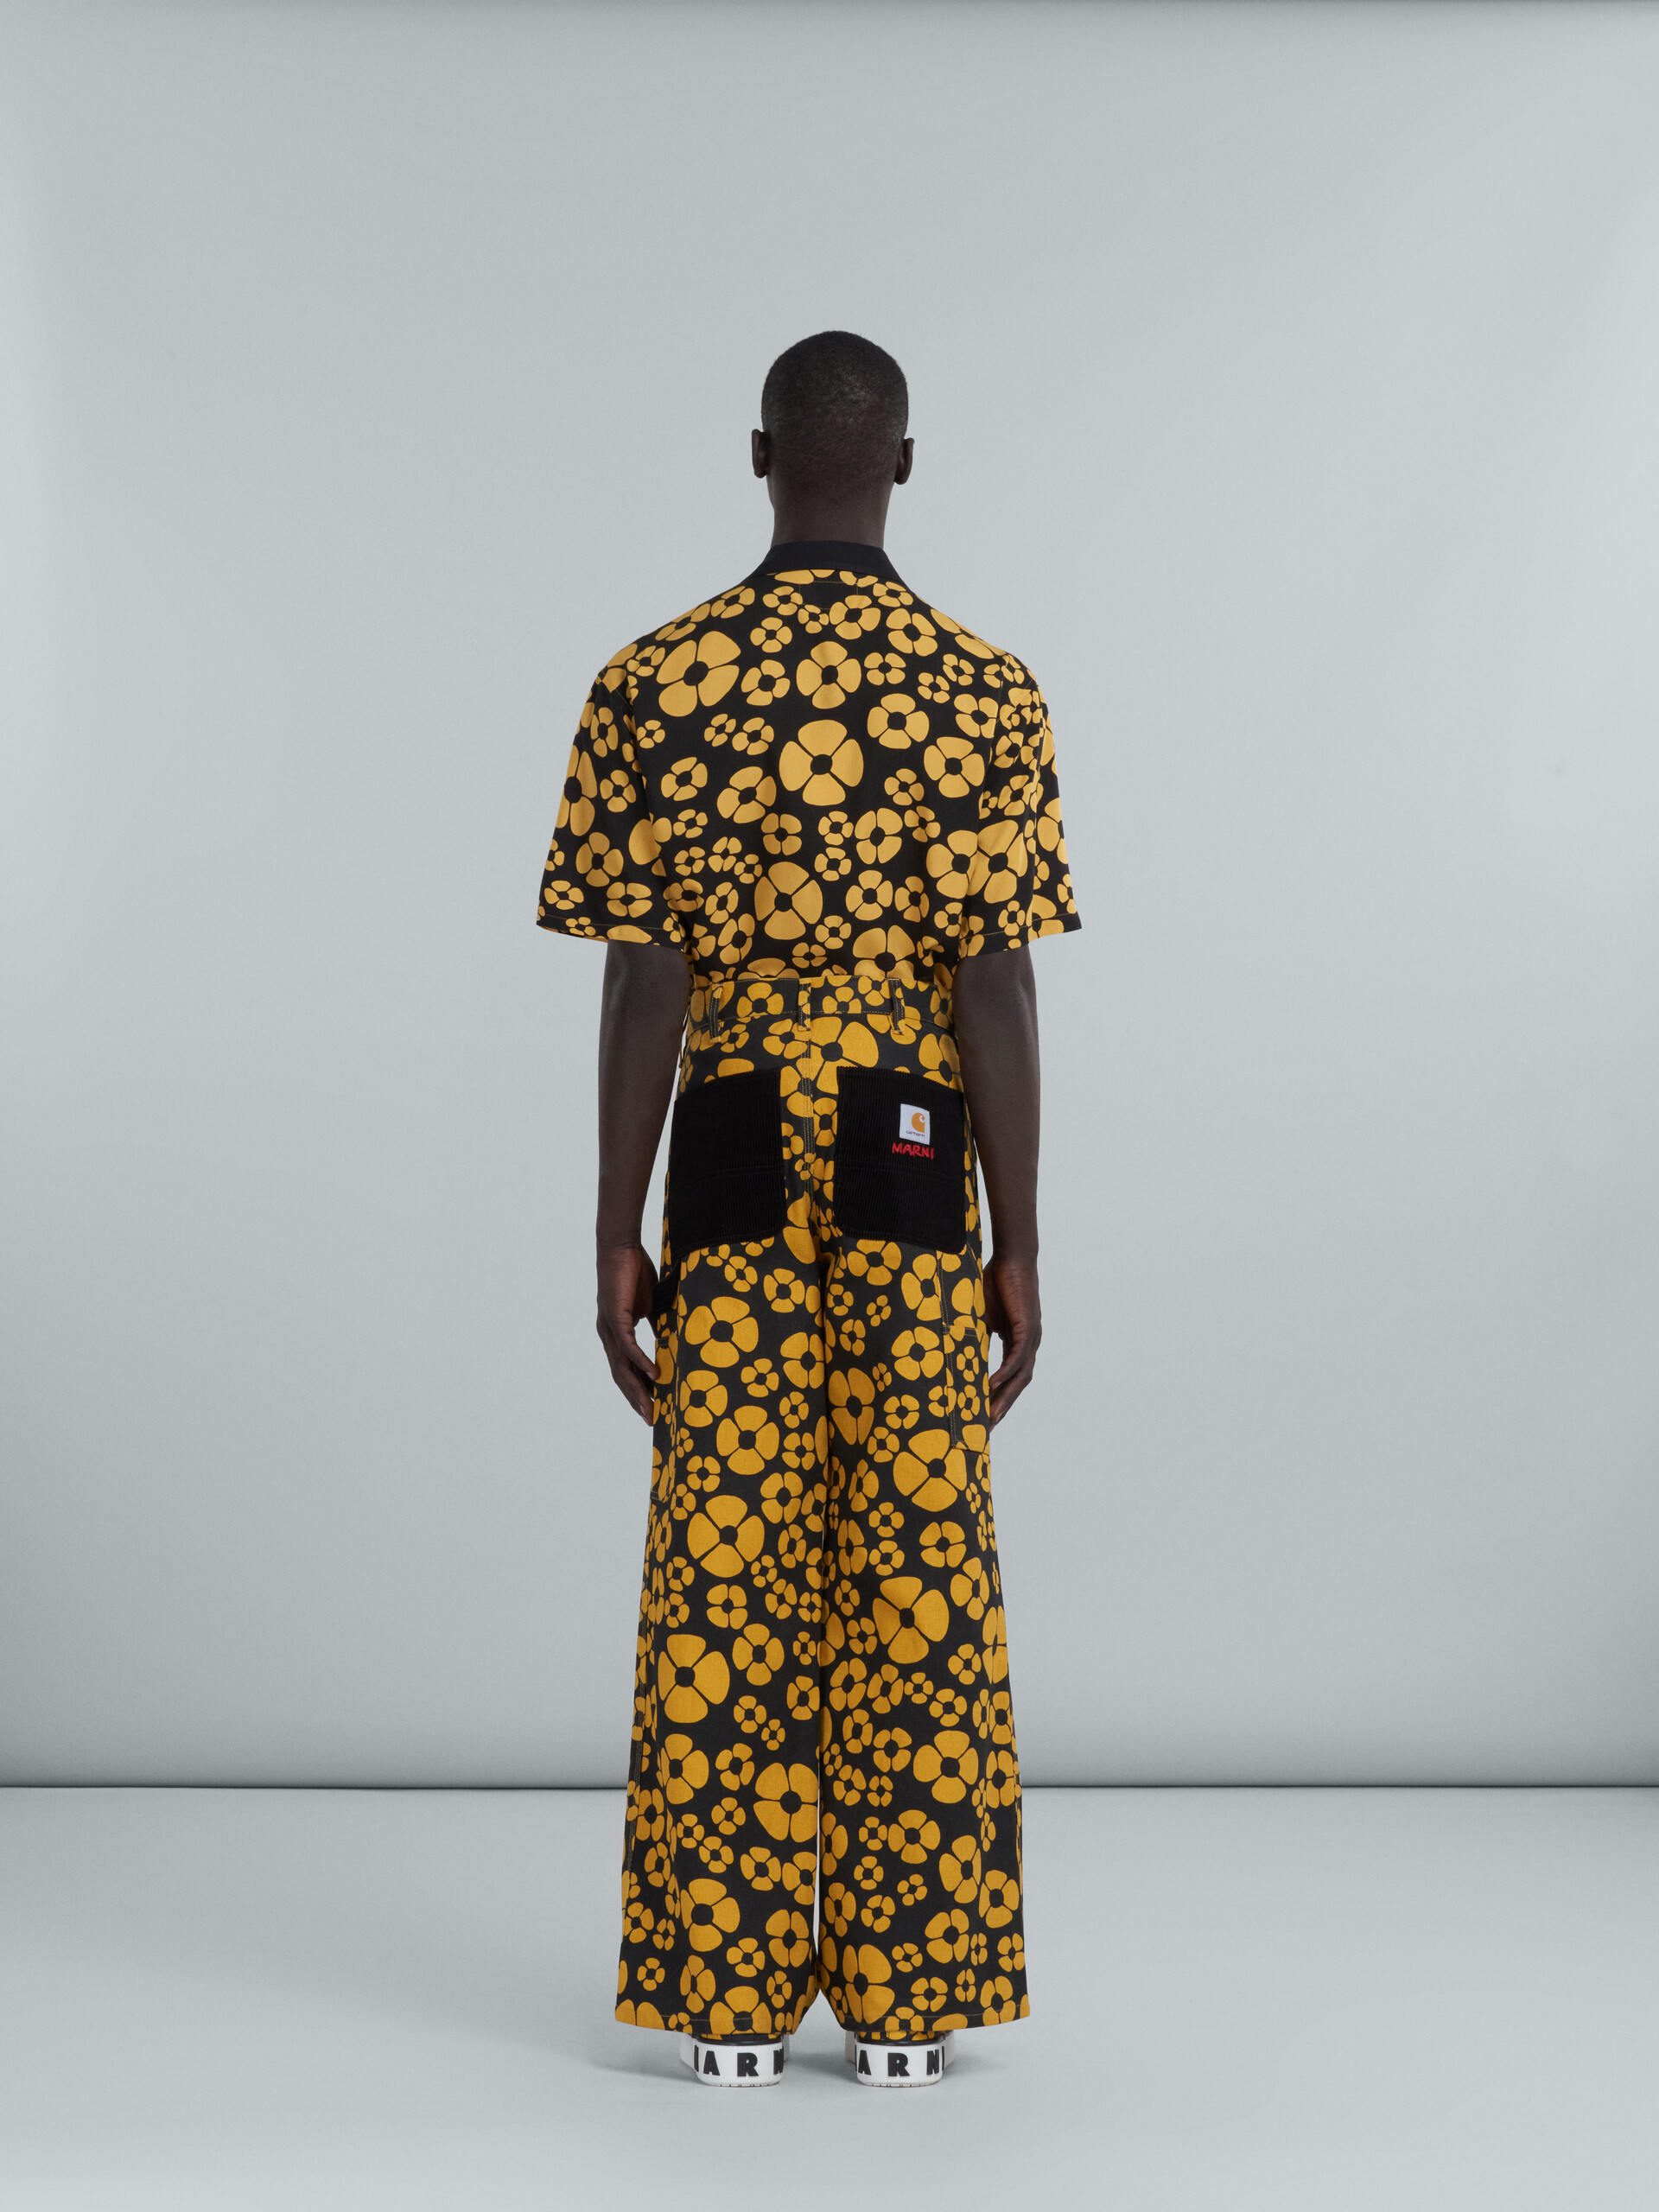 MARNI x CARHARTT WIP - yellow floral trousers - Pants - Image 3